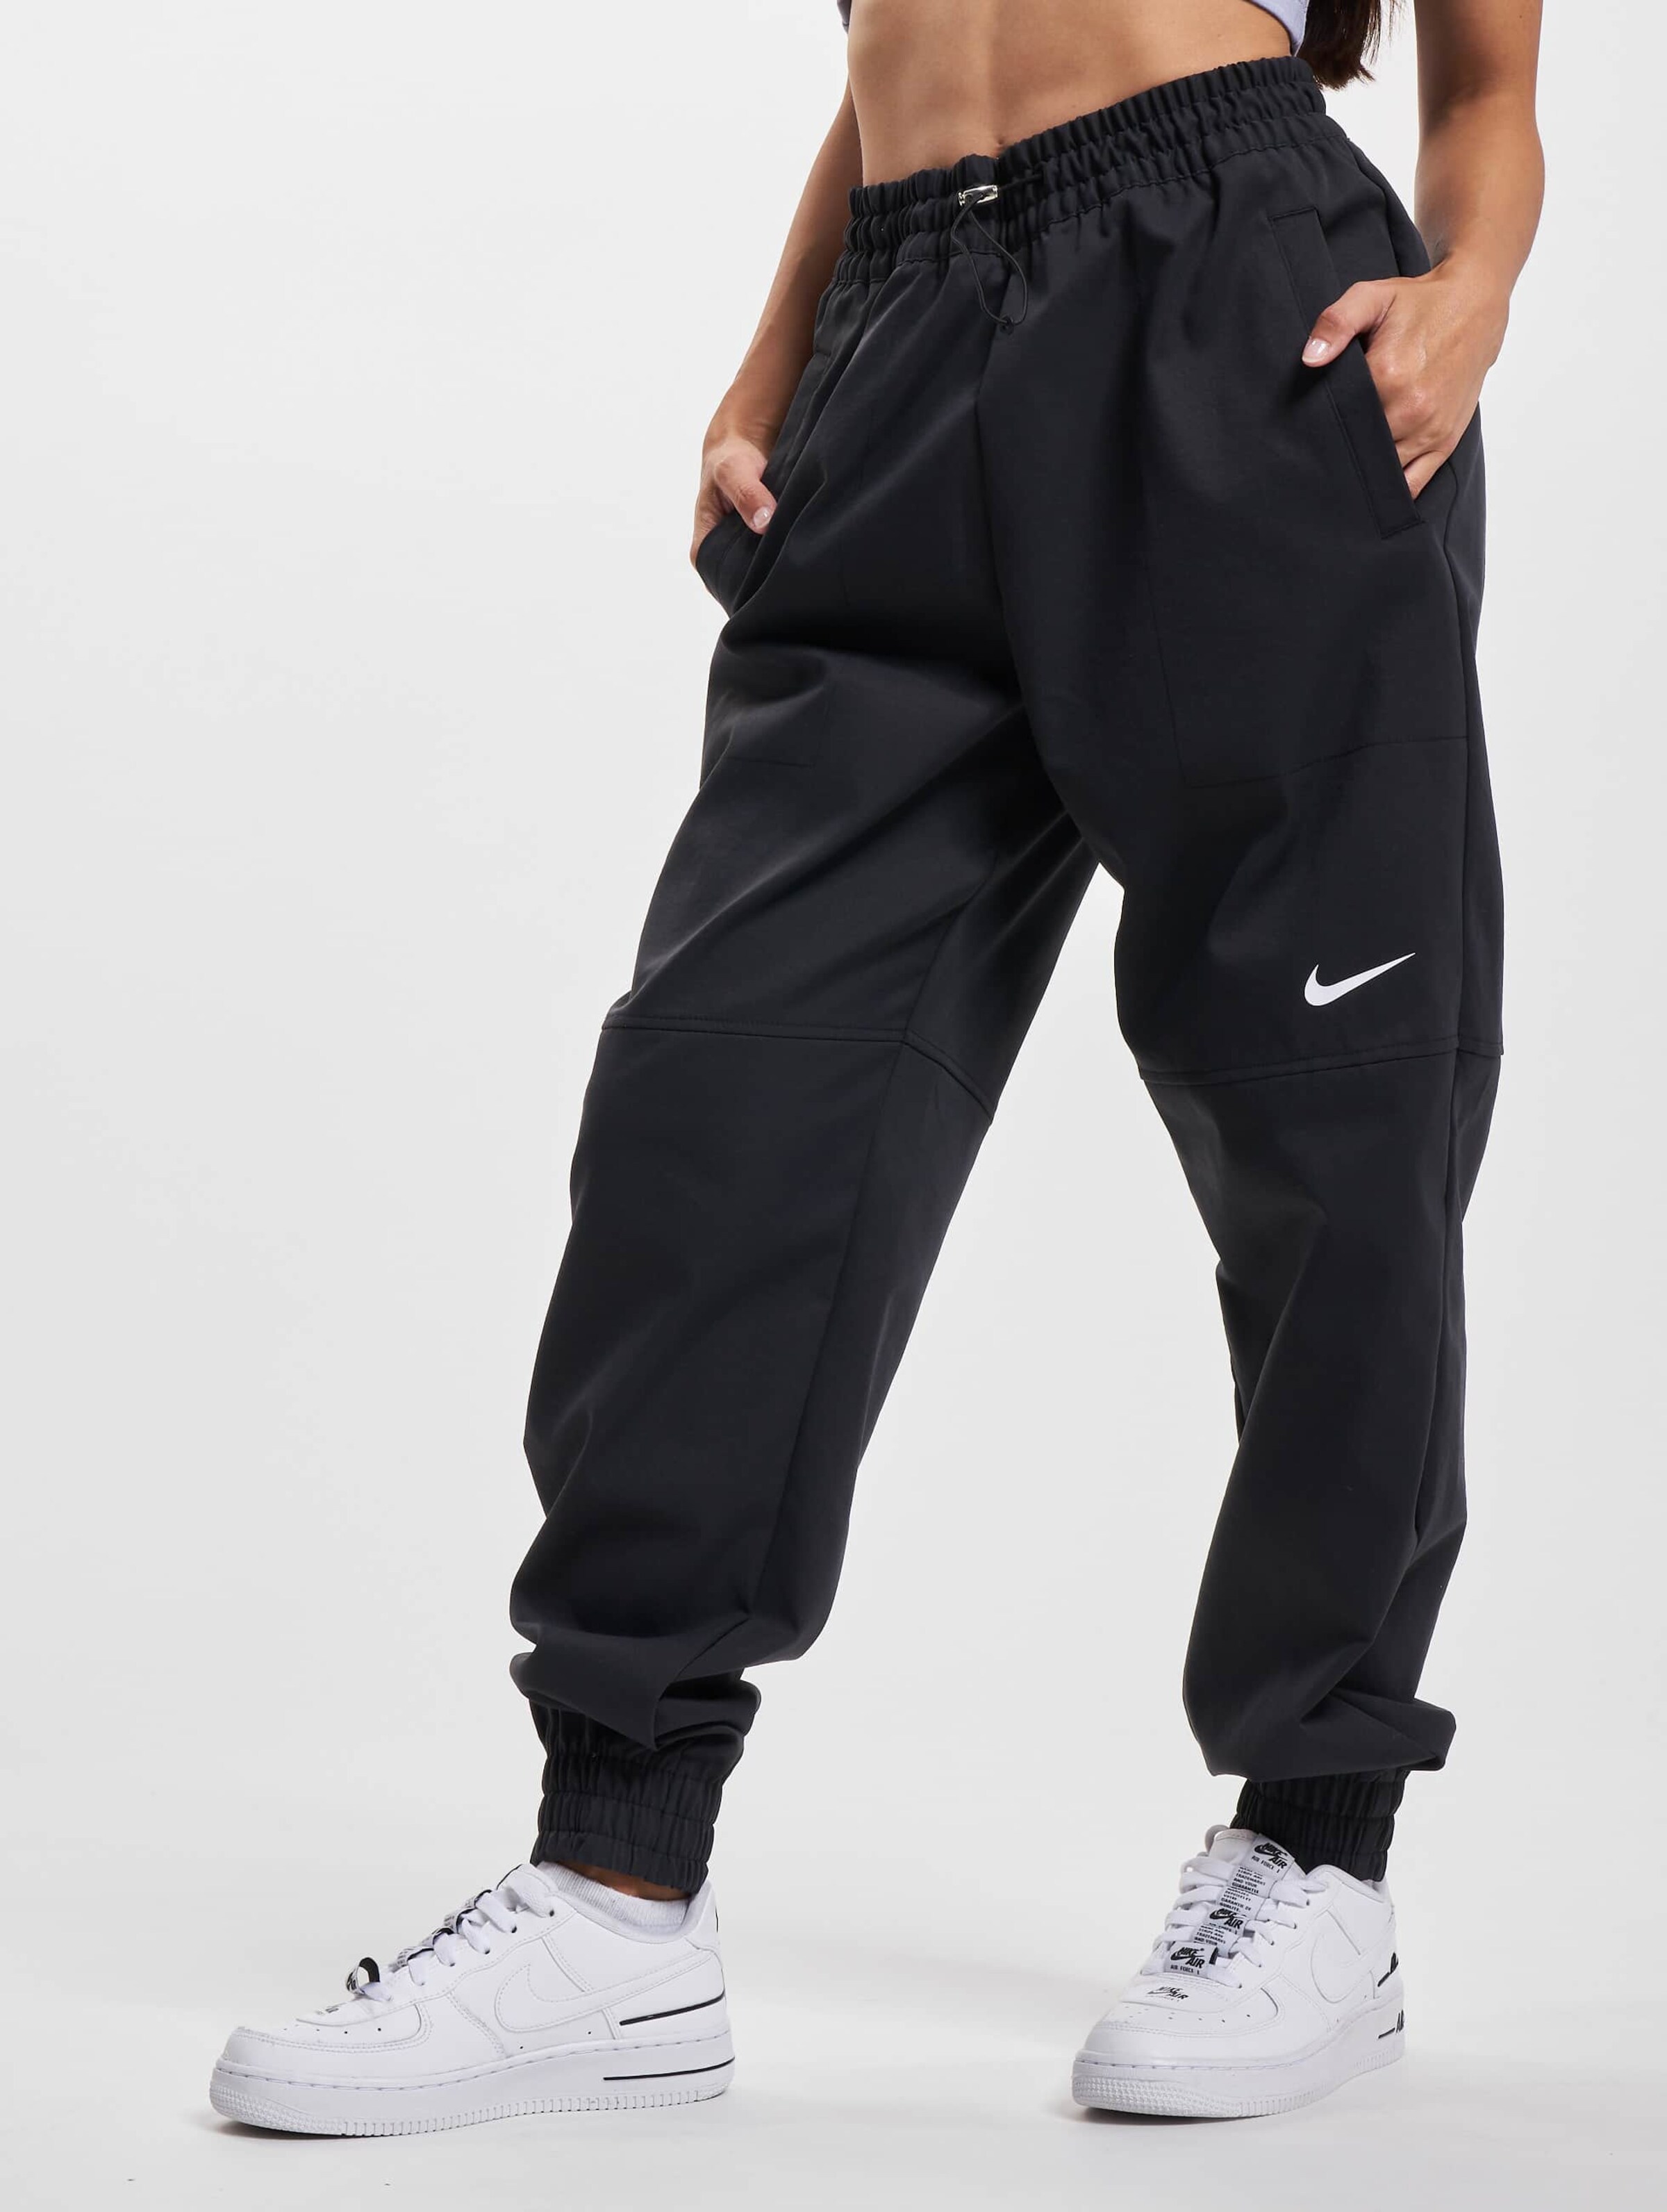 NIKE SPORTSWEAR SWOOSH MENS WOVEN PANTS TROUSERS BRAND NEW WITH